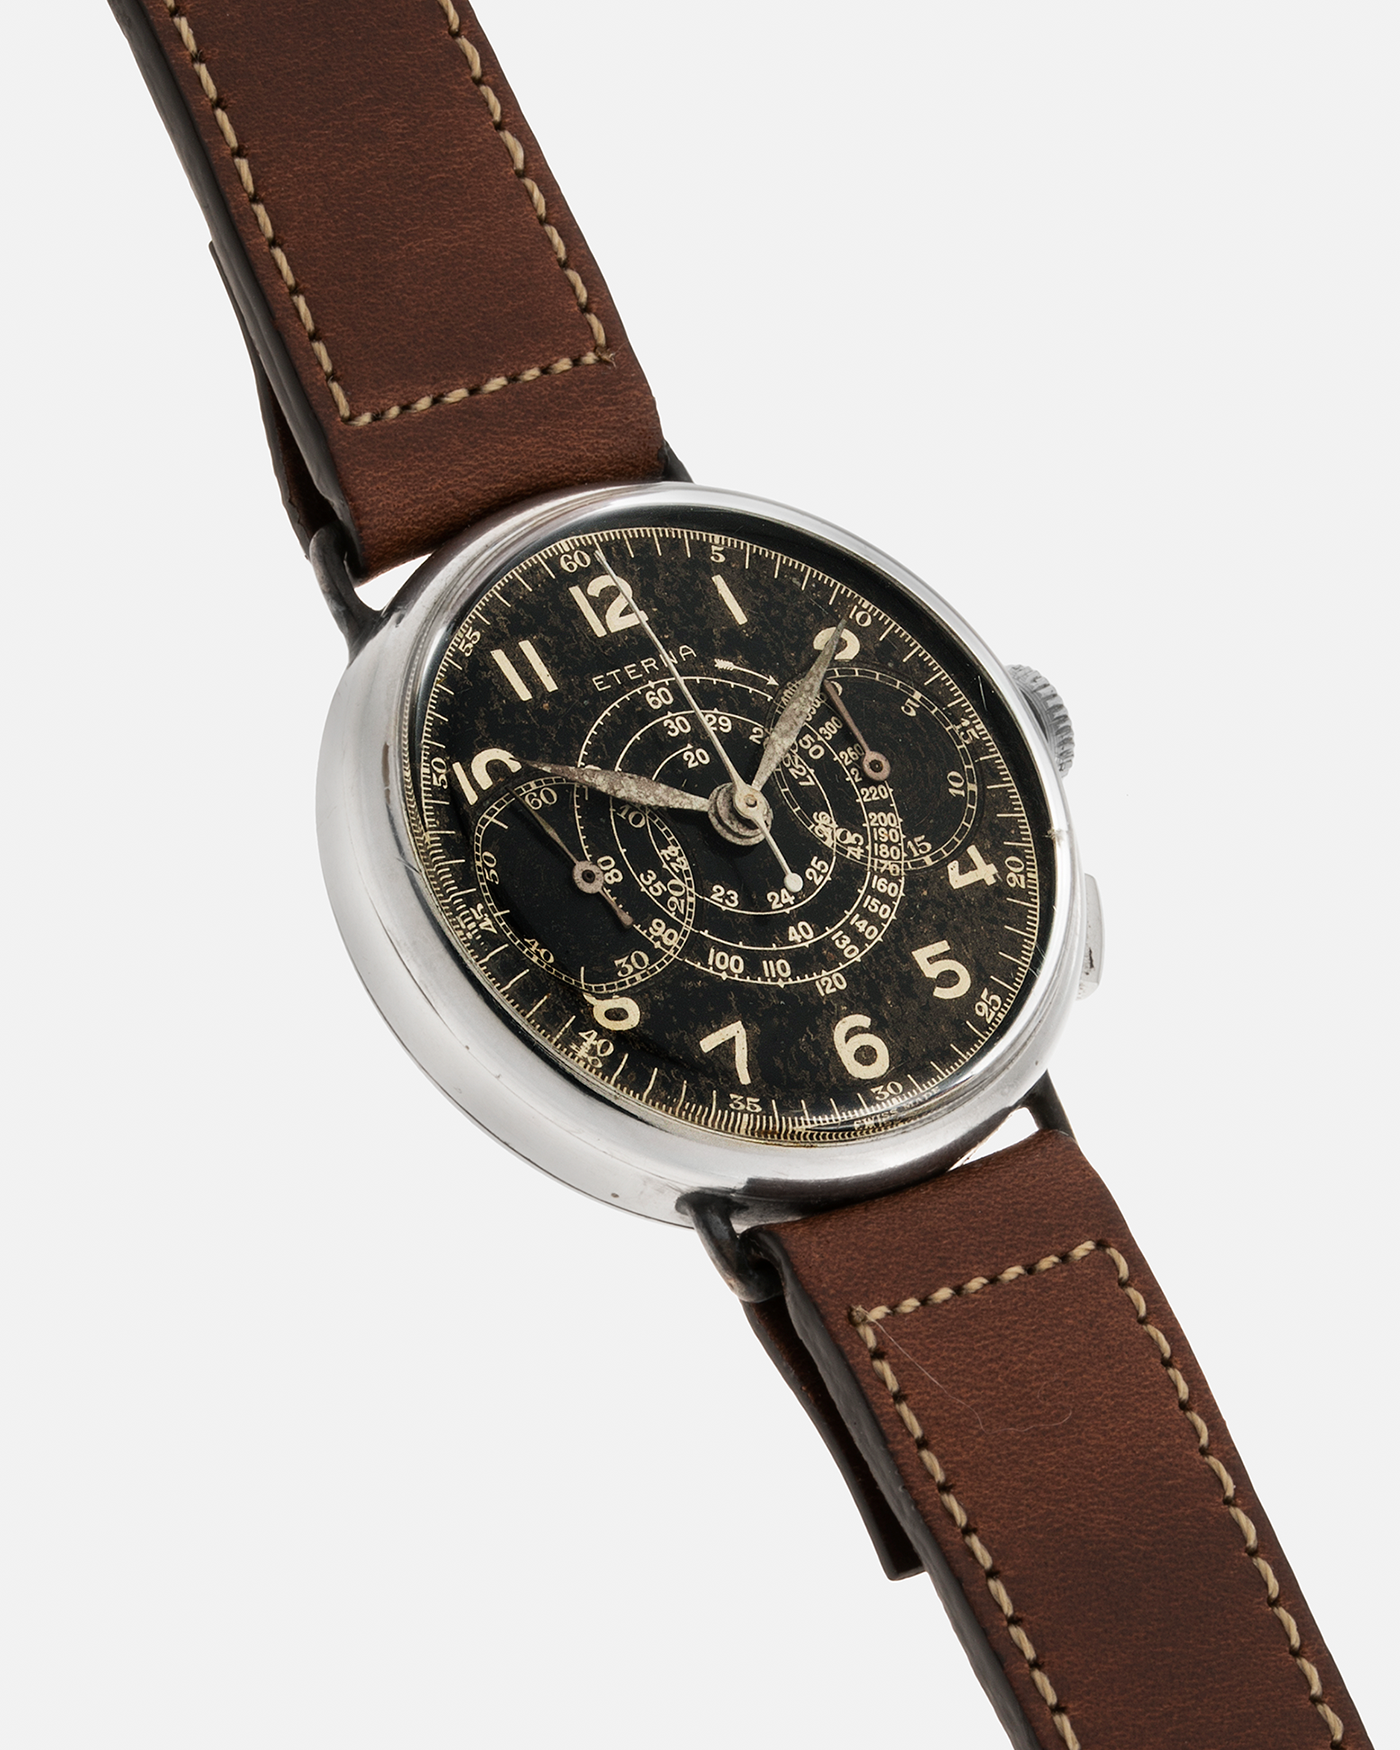 Brand: Eterna Year: 1940’s Serial Number: 2469370 Material: Stainless Steel (Staybrite) Movement: Cal. 703 (Based on Valjoux Cal. 22), Manual-Winding Case Diameter: 38mm Lug Width: 18mm Strap: Curious Curio Brown Open End Calf Leather Strap